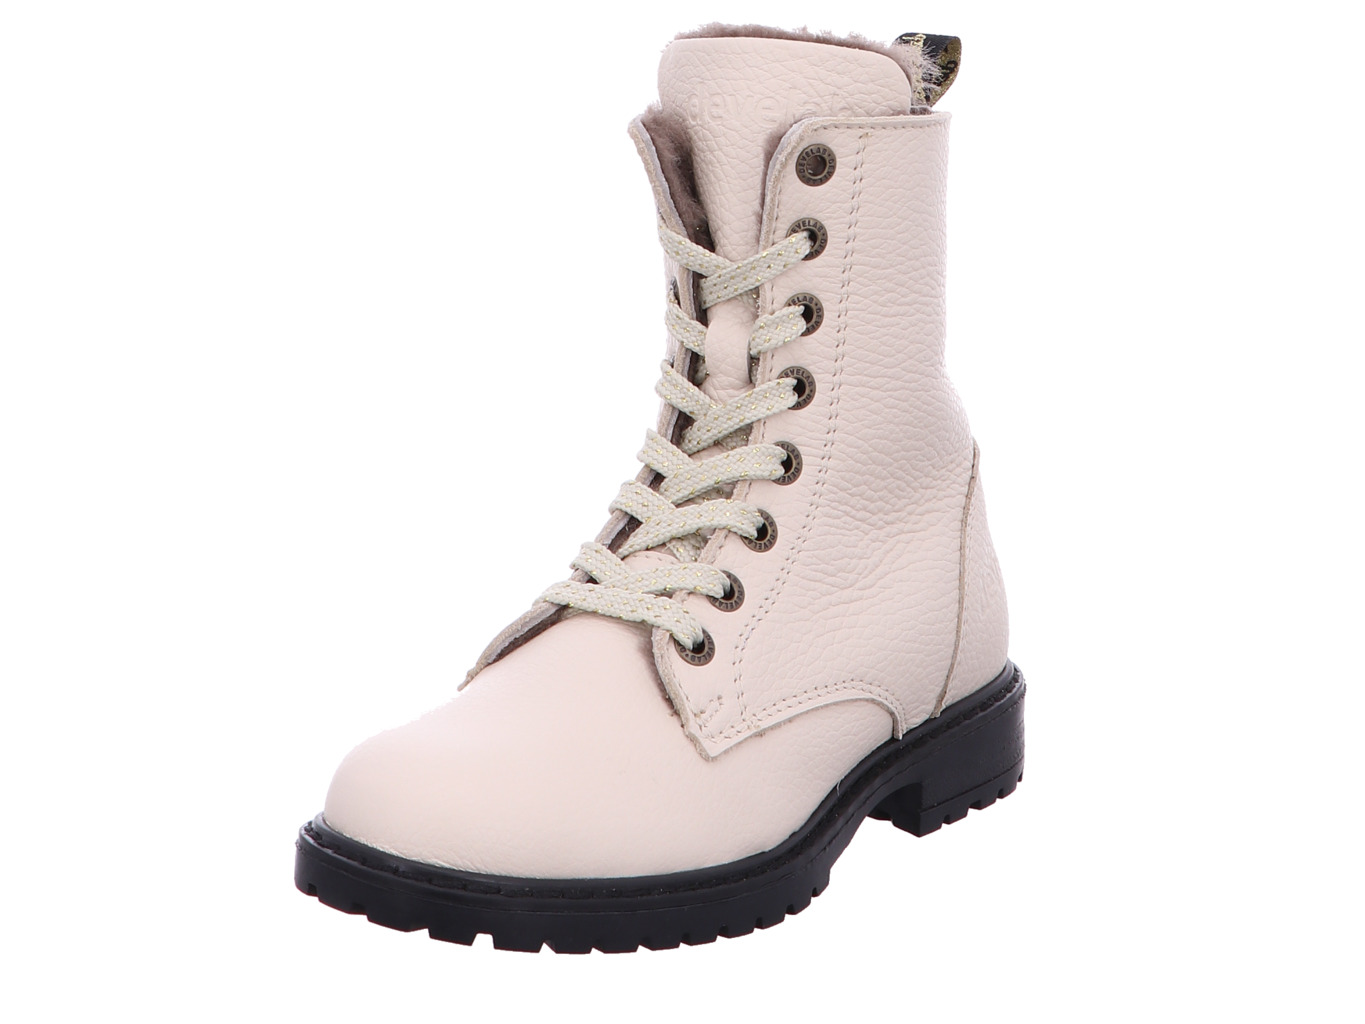 develab_girls_mid_boot_laces_42846_222_1143